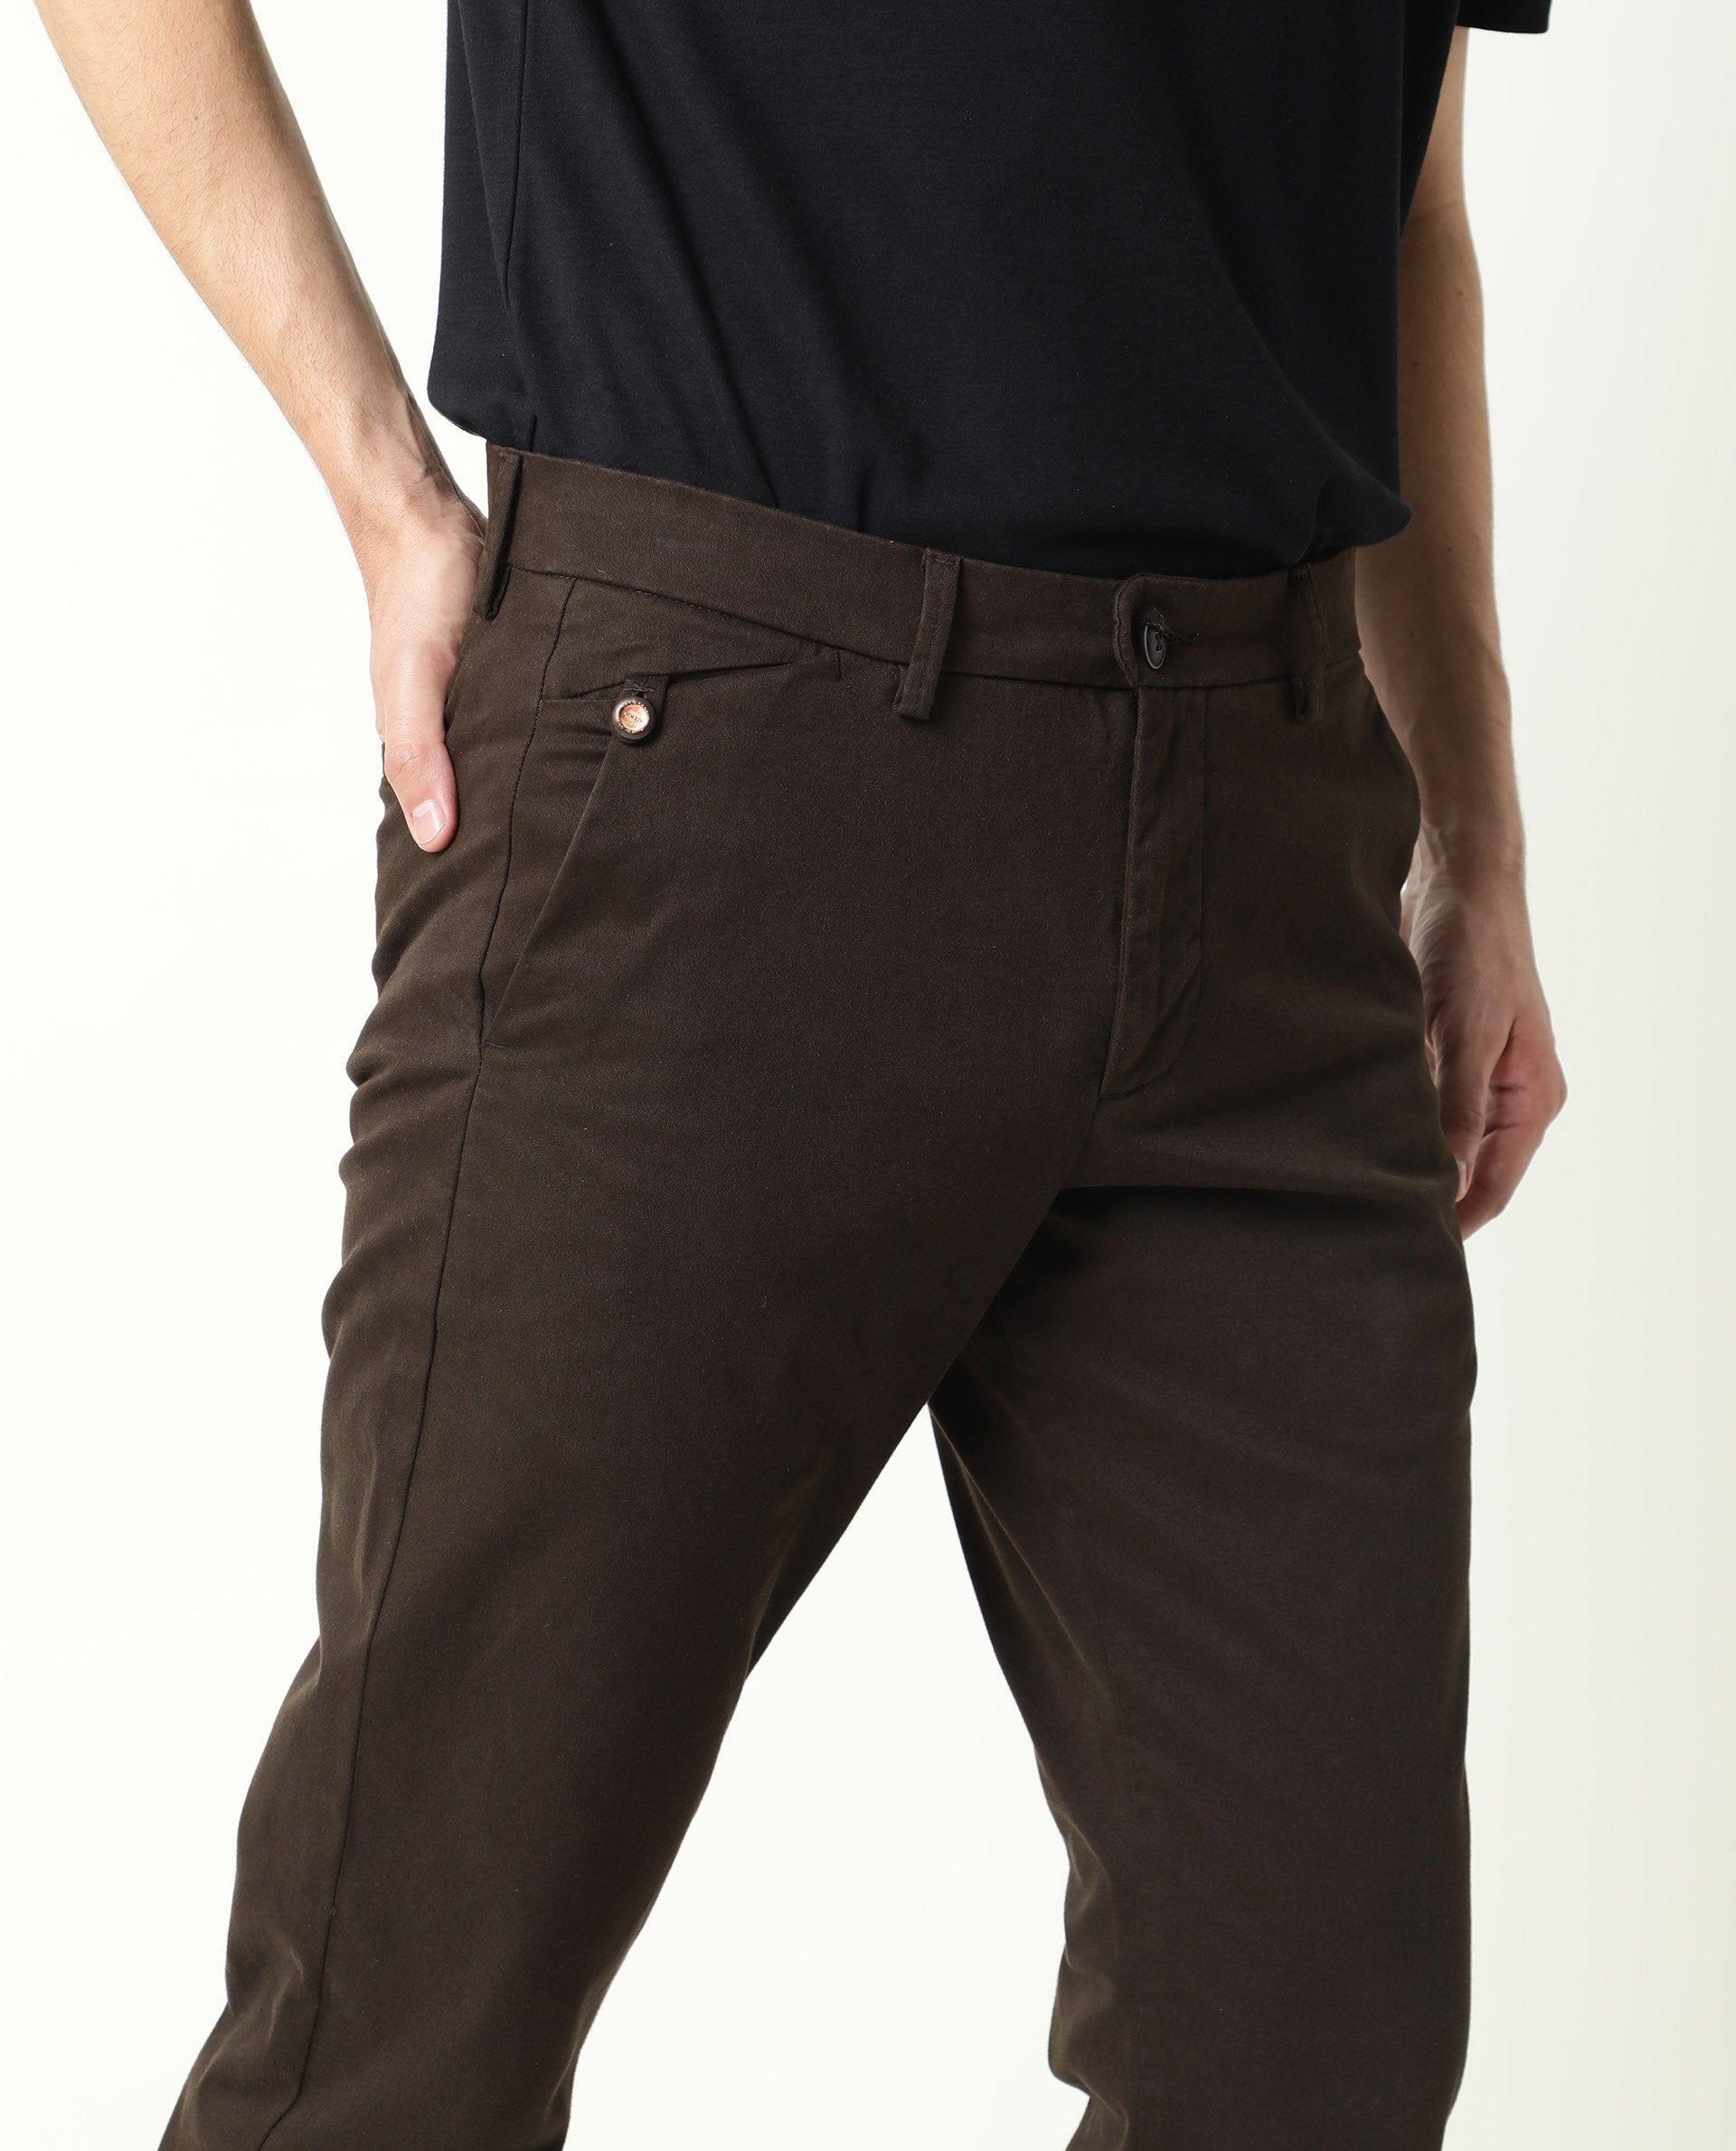 Buy Coffee  brown chinos for men stretchable trousers for men  slim fit  pants for men  chinos pants for mens  cotton chinos for men  casual pants  men 